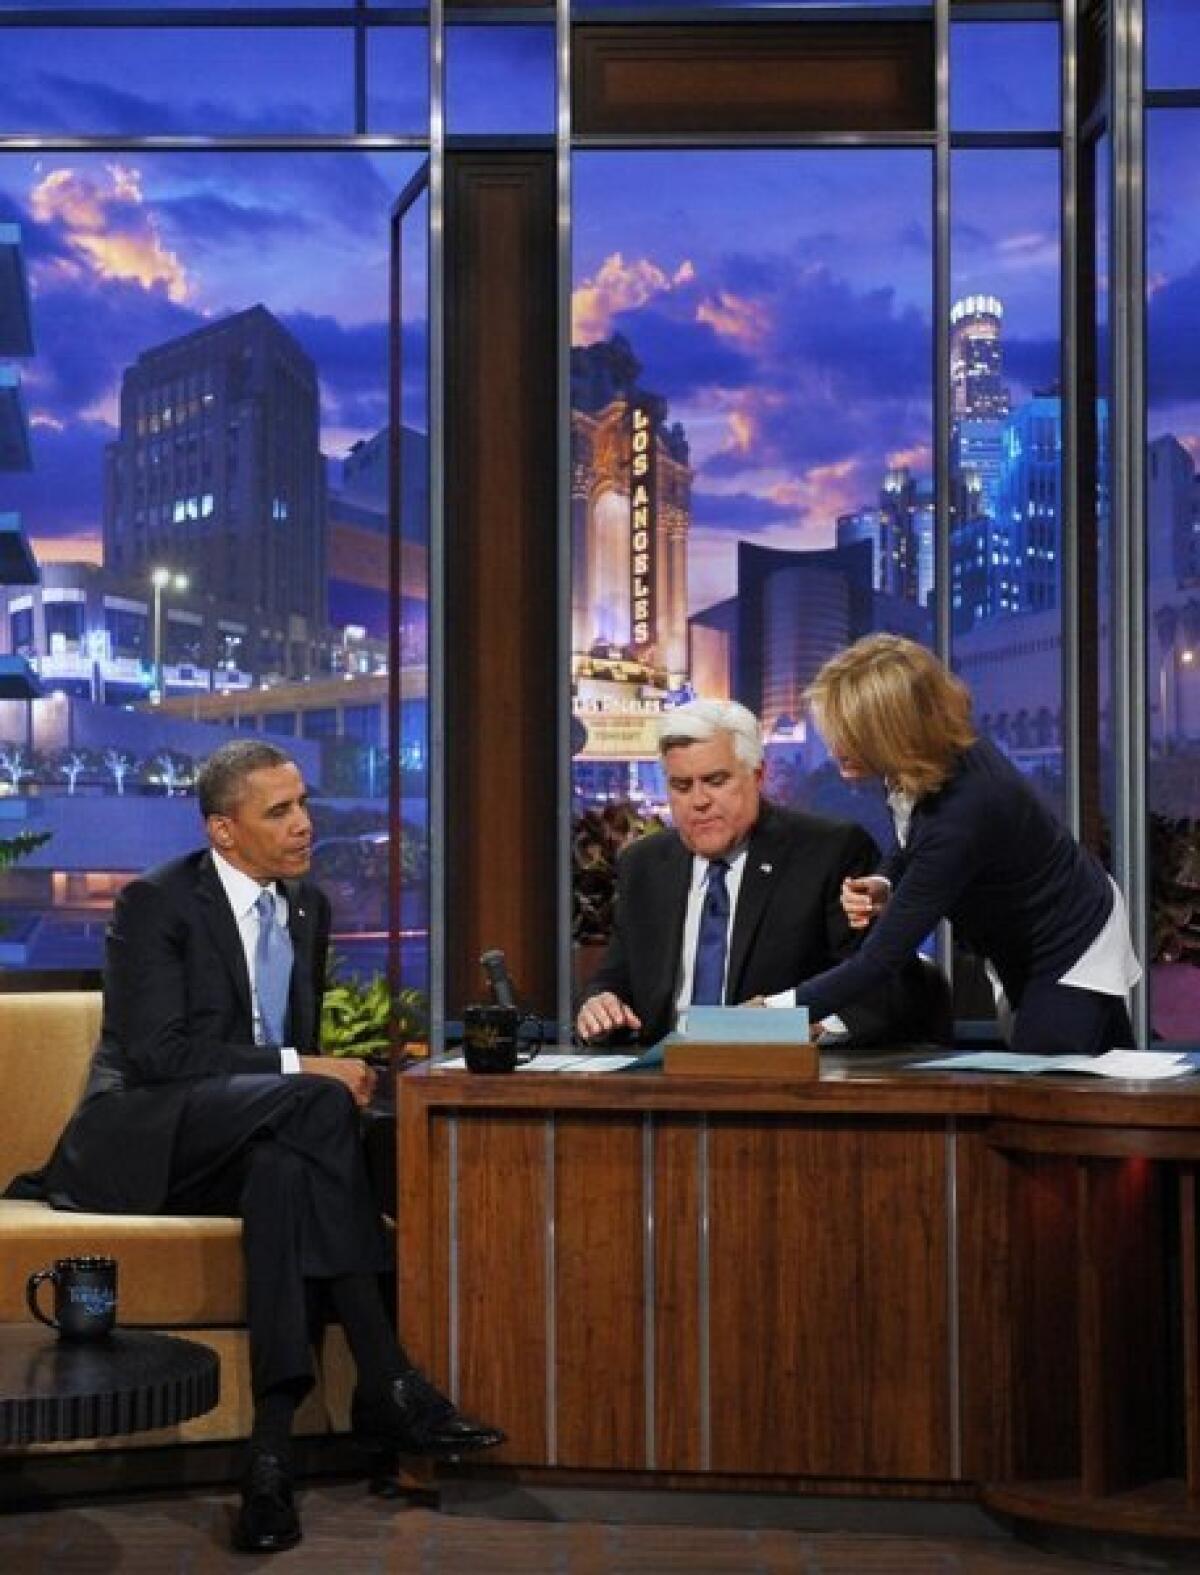 President Obama on the "Tonight Show" with Jay Leno.